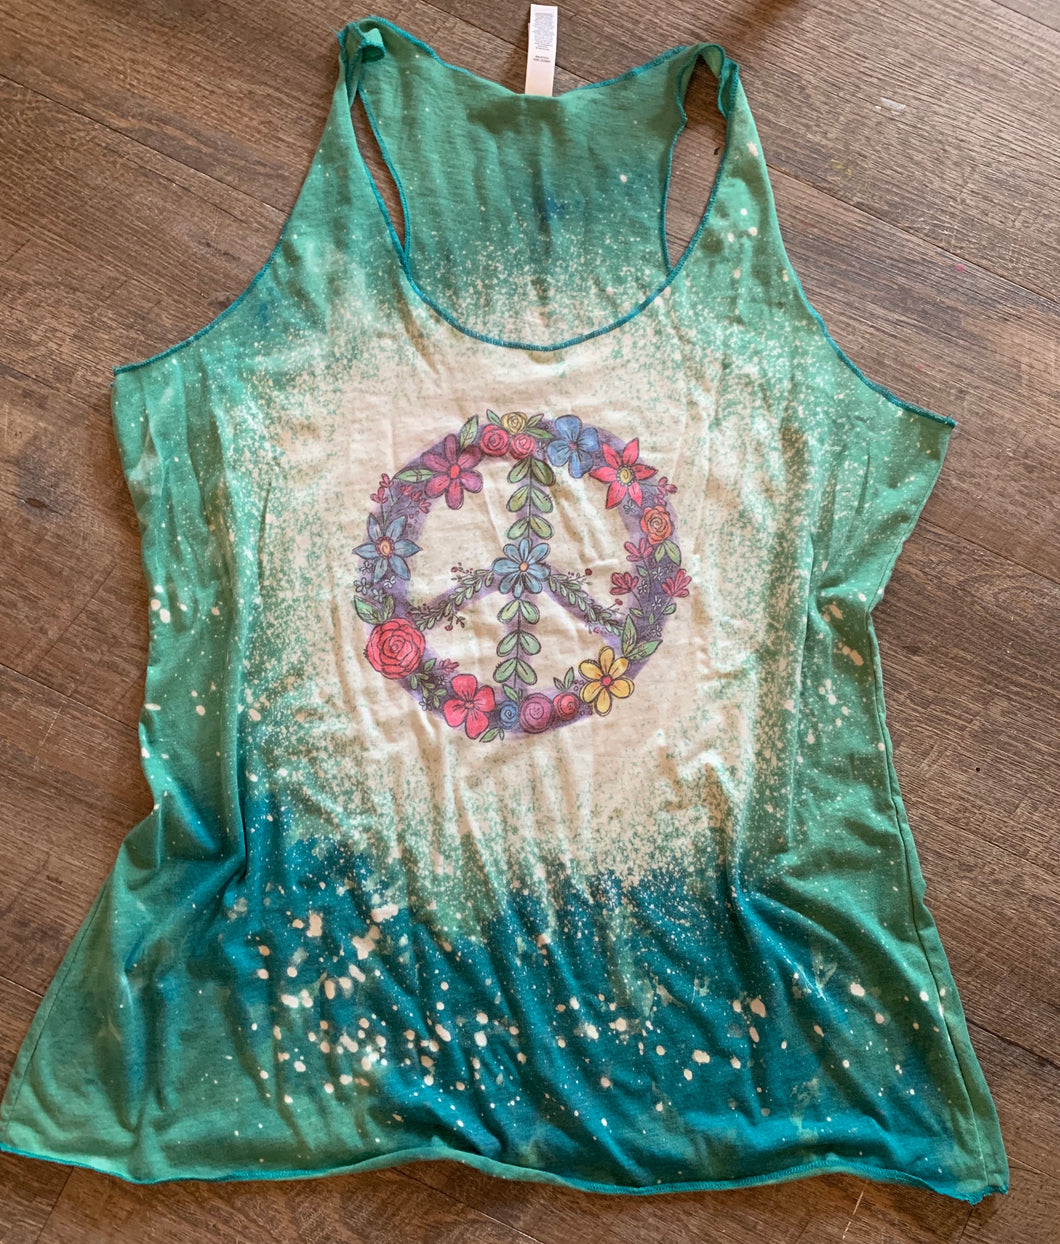 Boho bleached teal floral peace sign graphic tank or tee - Mavictoria Designs Hot Press Express